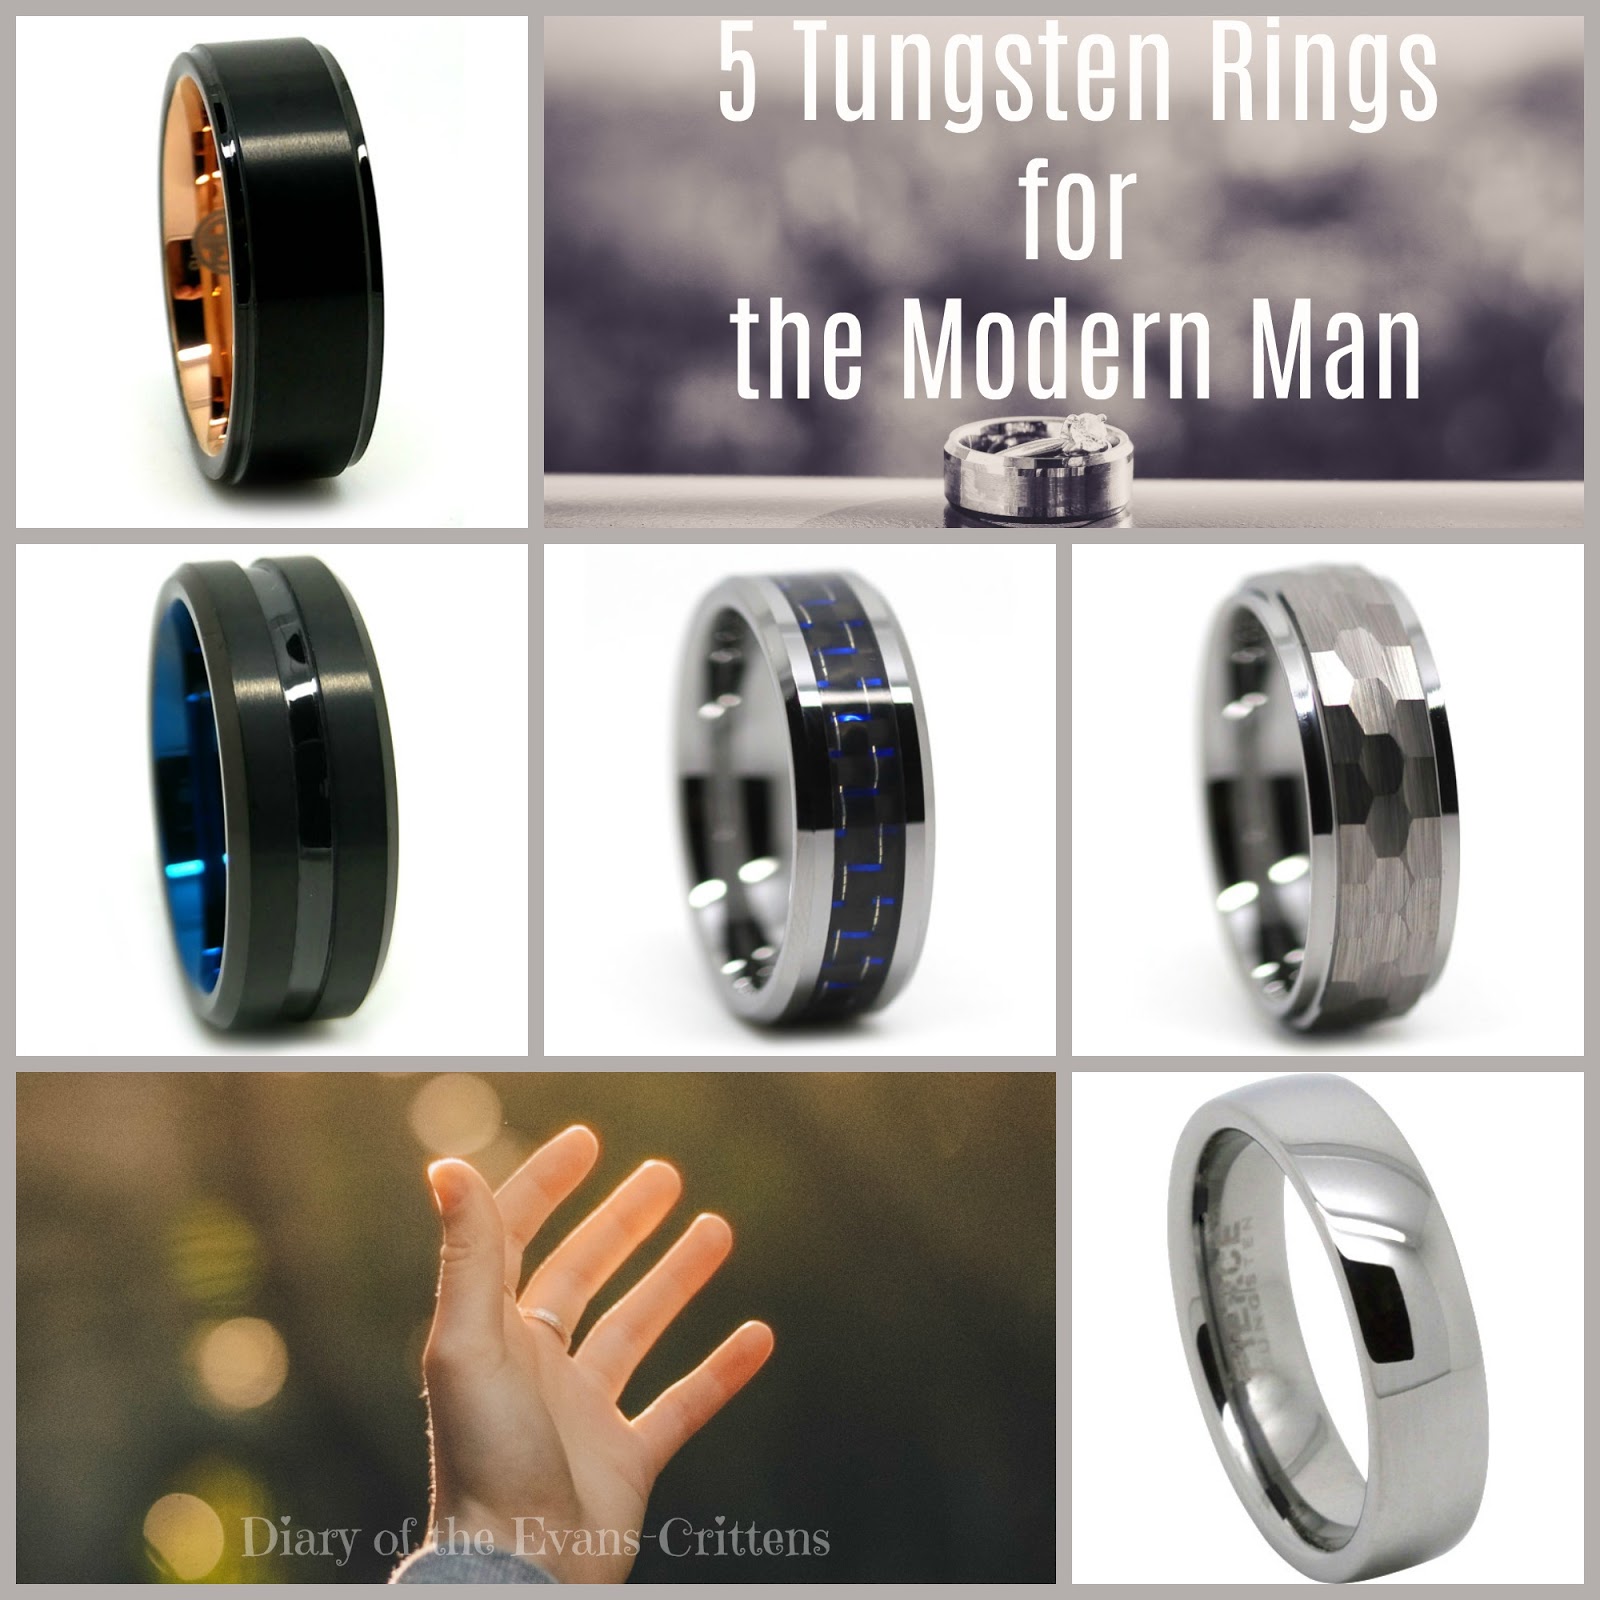 , Style:  5 Tungsten Rings for the Modern Man